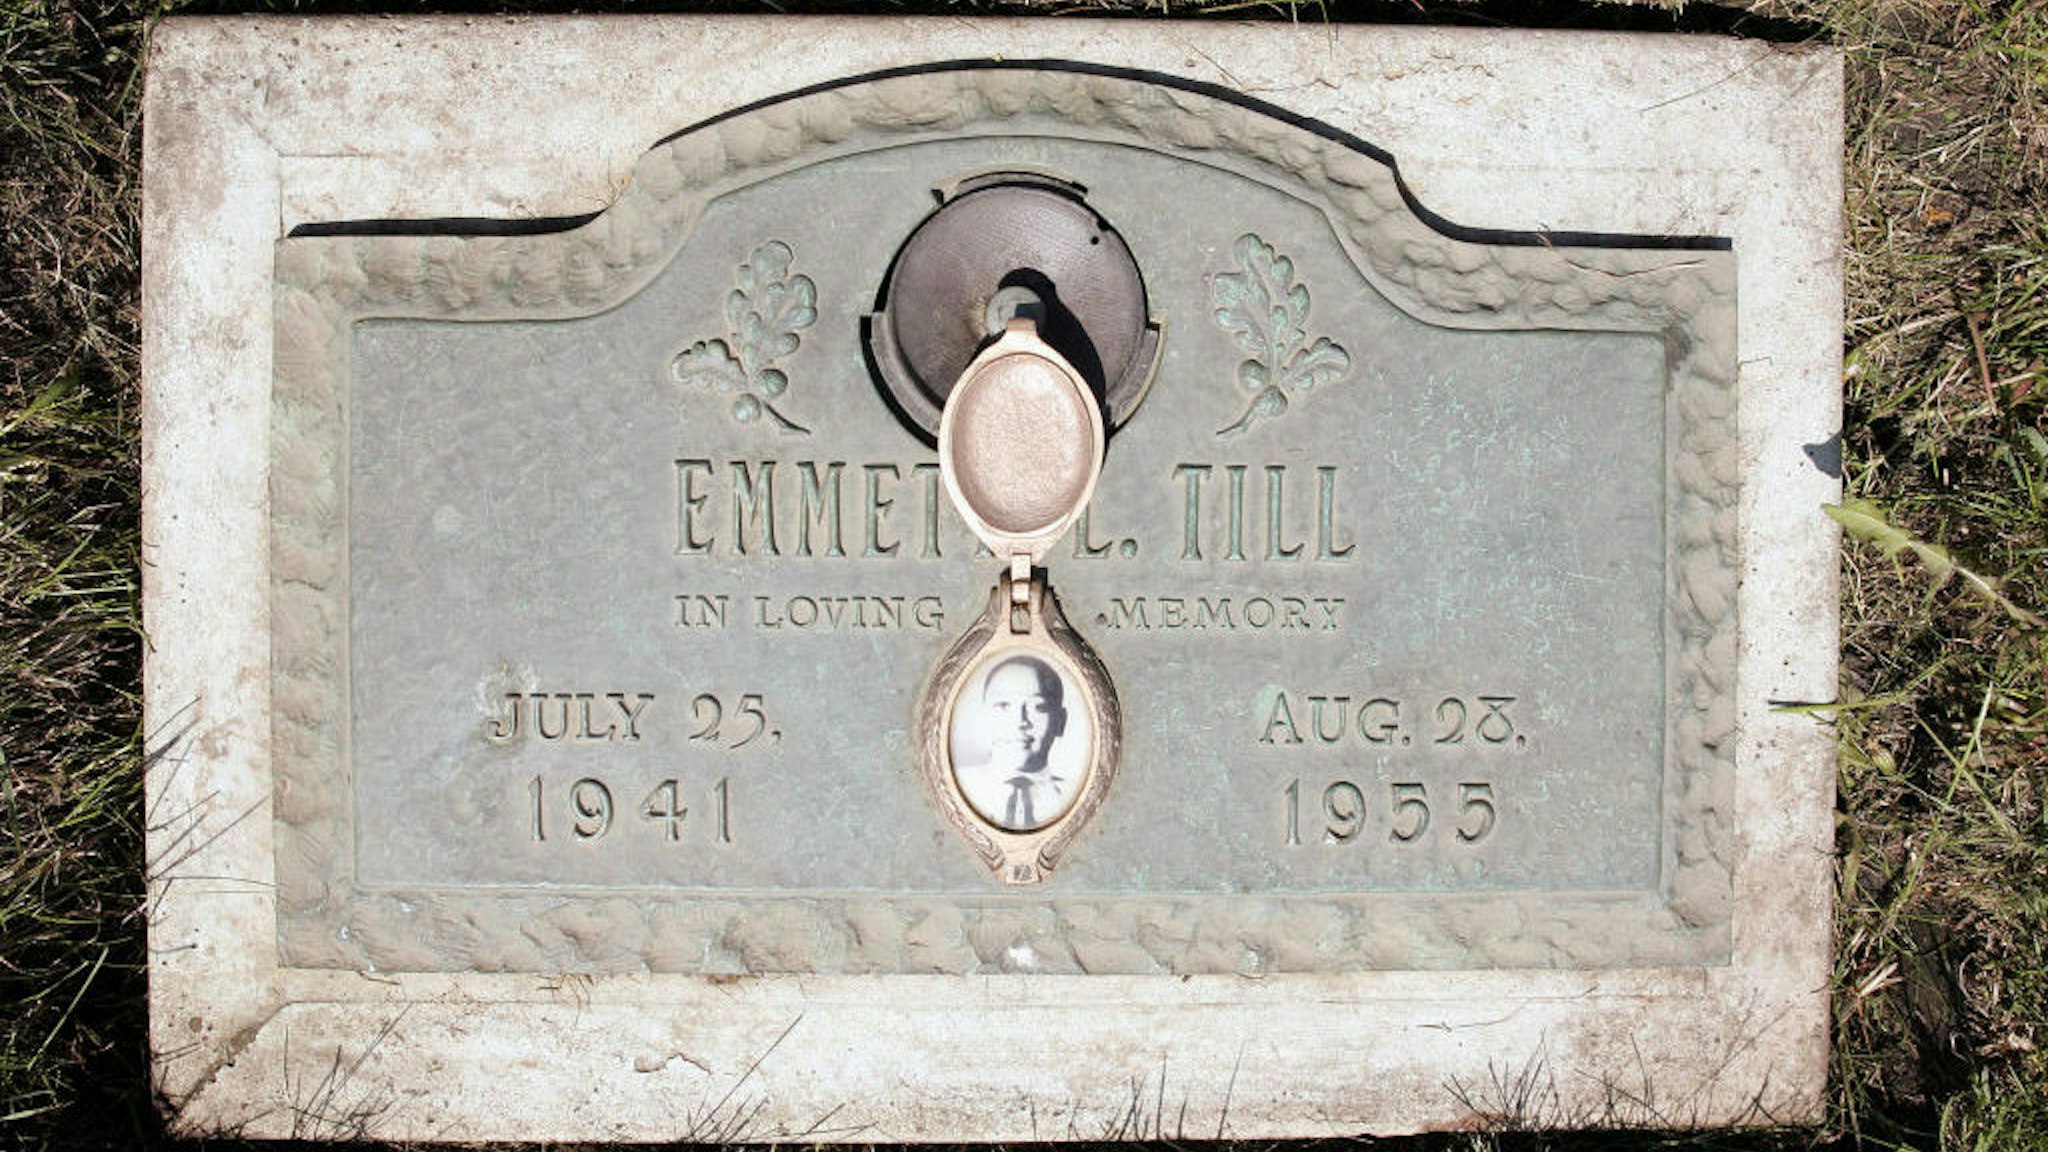 A plaque marks the gravesite of Emmett Till at Burr Oak Cemetery May 4, 2005 in Aslip, Illinois. The FBI is considering exhuming the body of Till, whose unsolved 1955 murder in Money, Mississippi, after whistling at a white woman helped spark the U.S. civil rights movement. (Photo by Scott Olson/Getty Images)